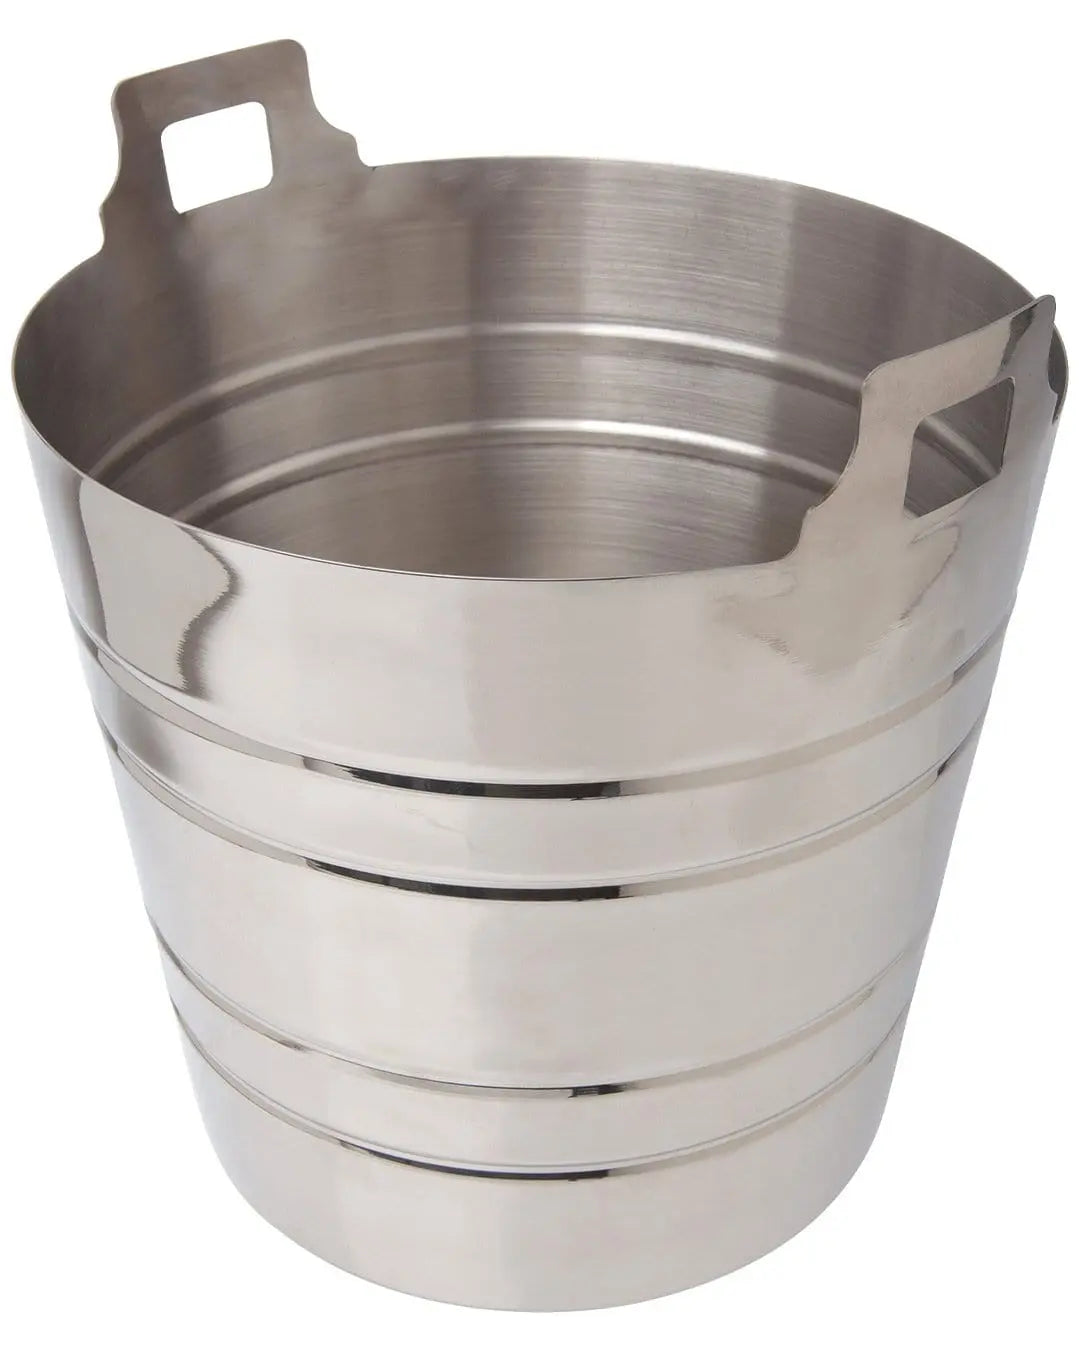 Beaumont Stainless Steel Champagne Bucket 5 Litre/9 Pint Tableware 5020229106319